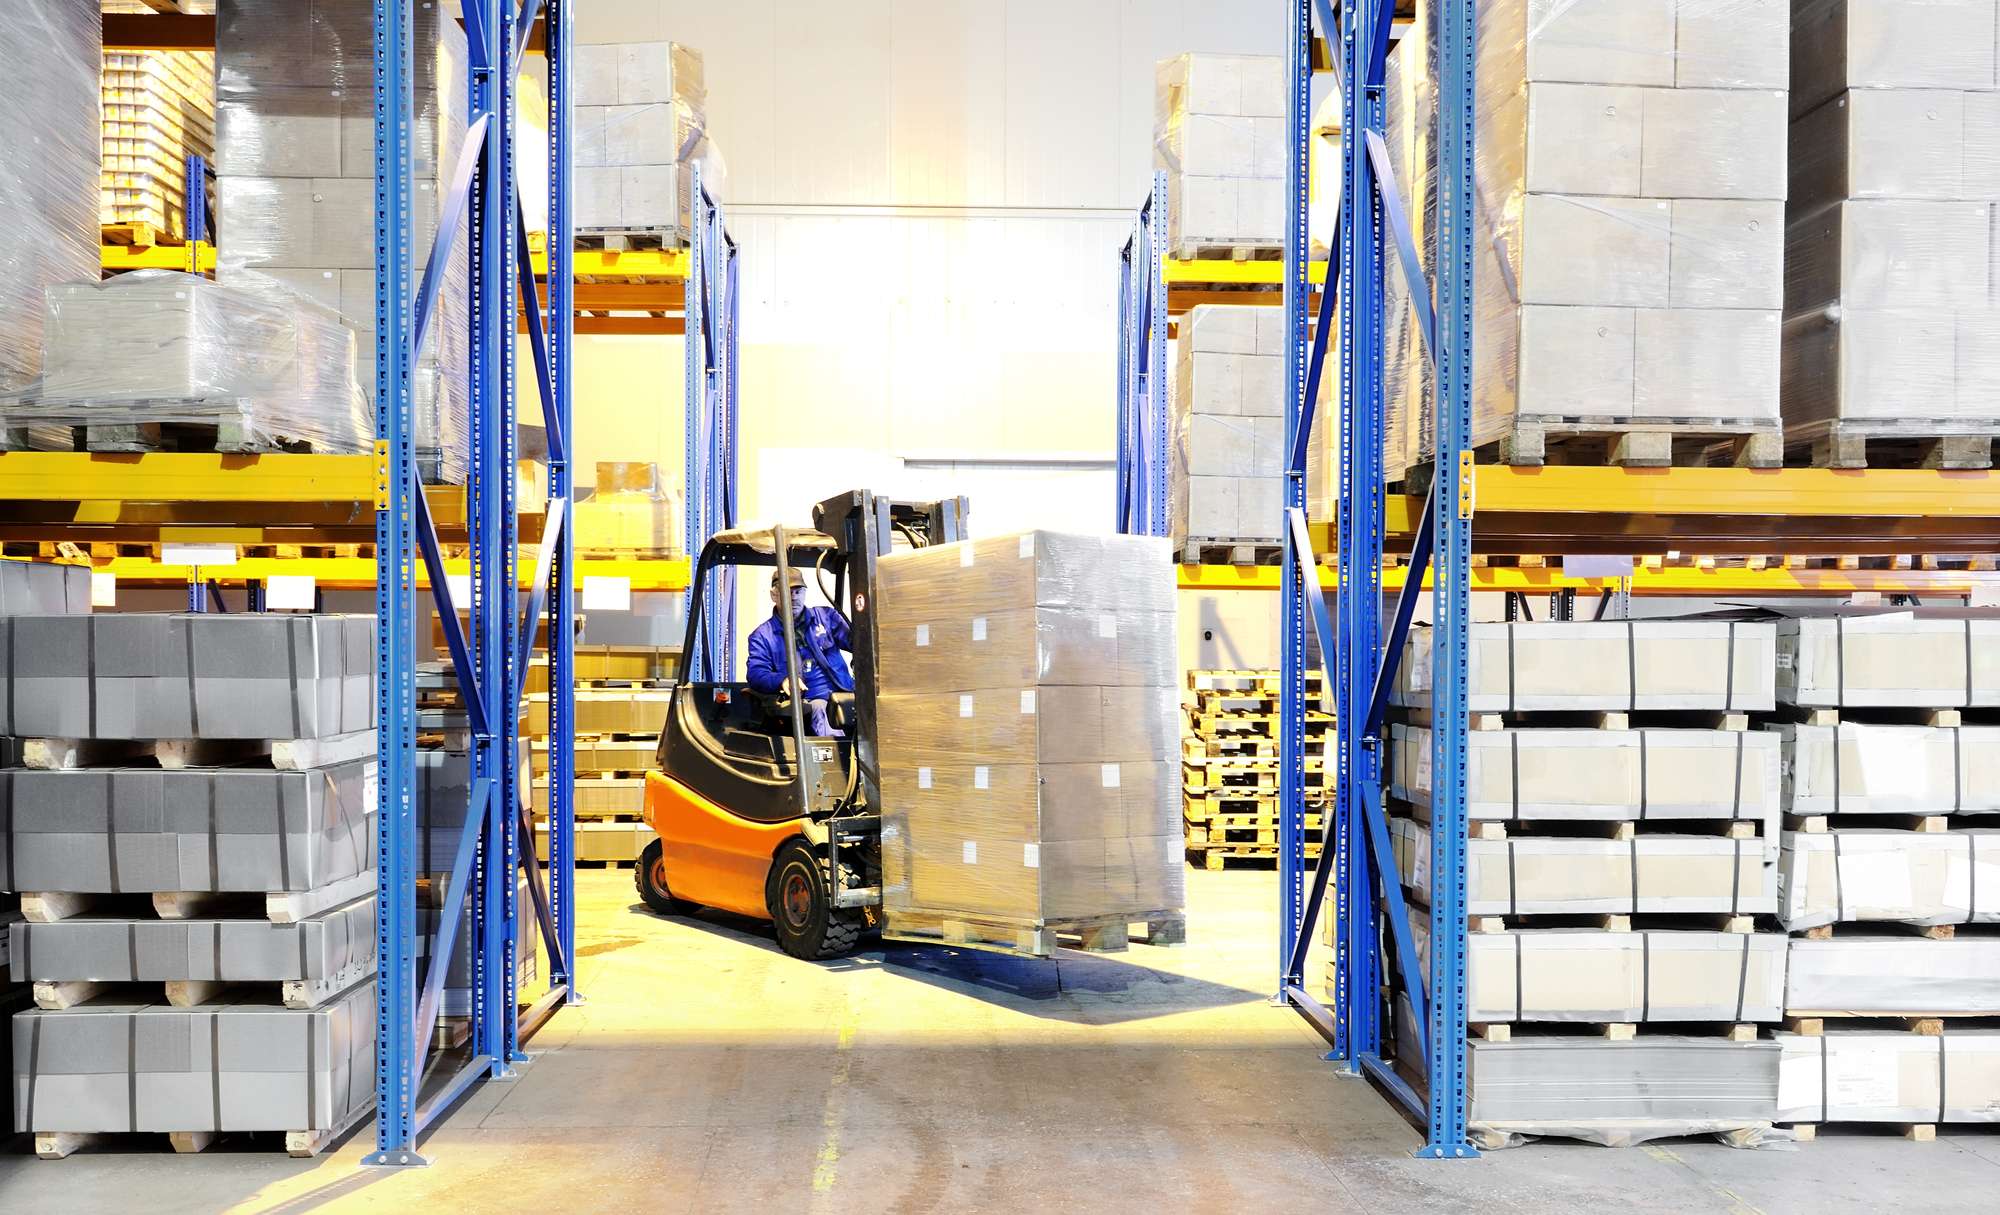 How Do Forklifts Work?